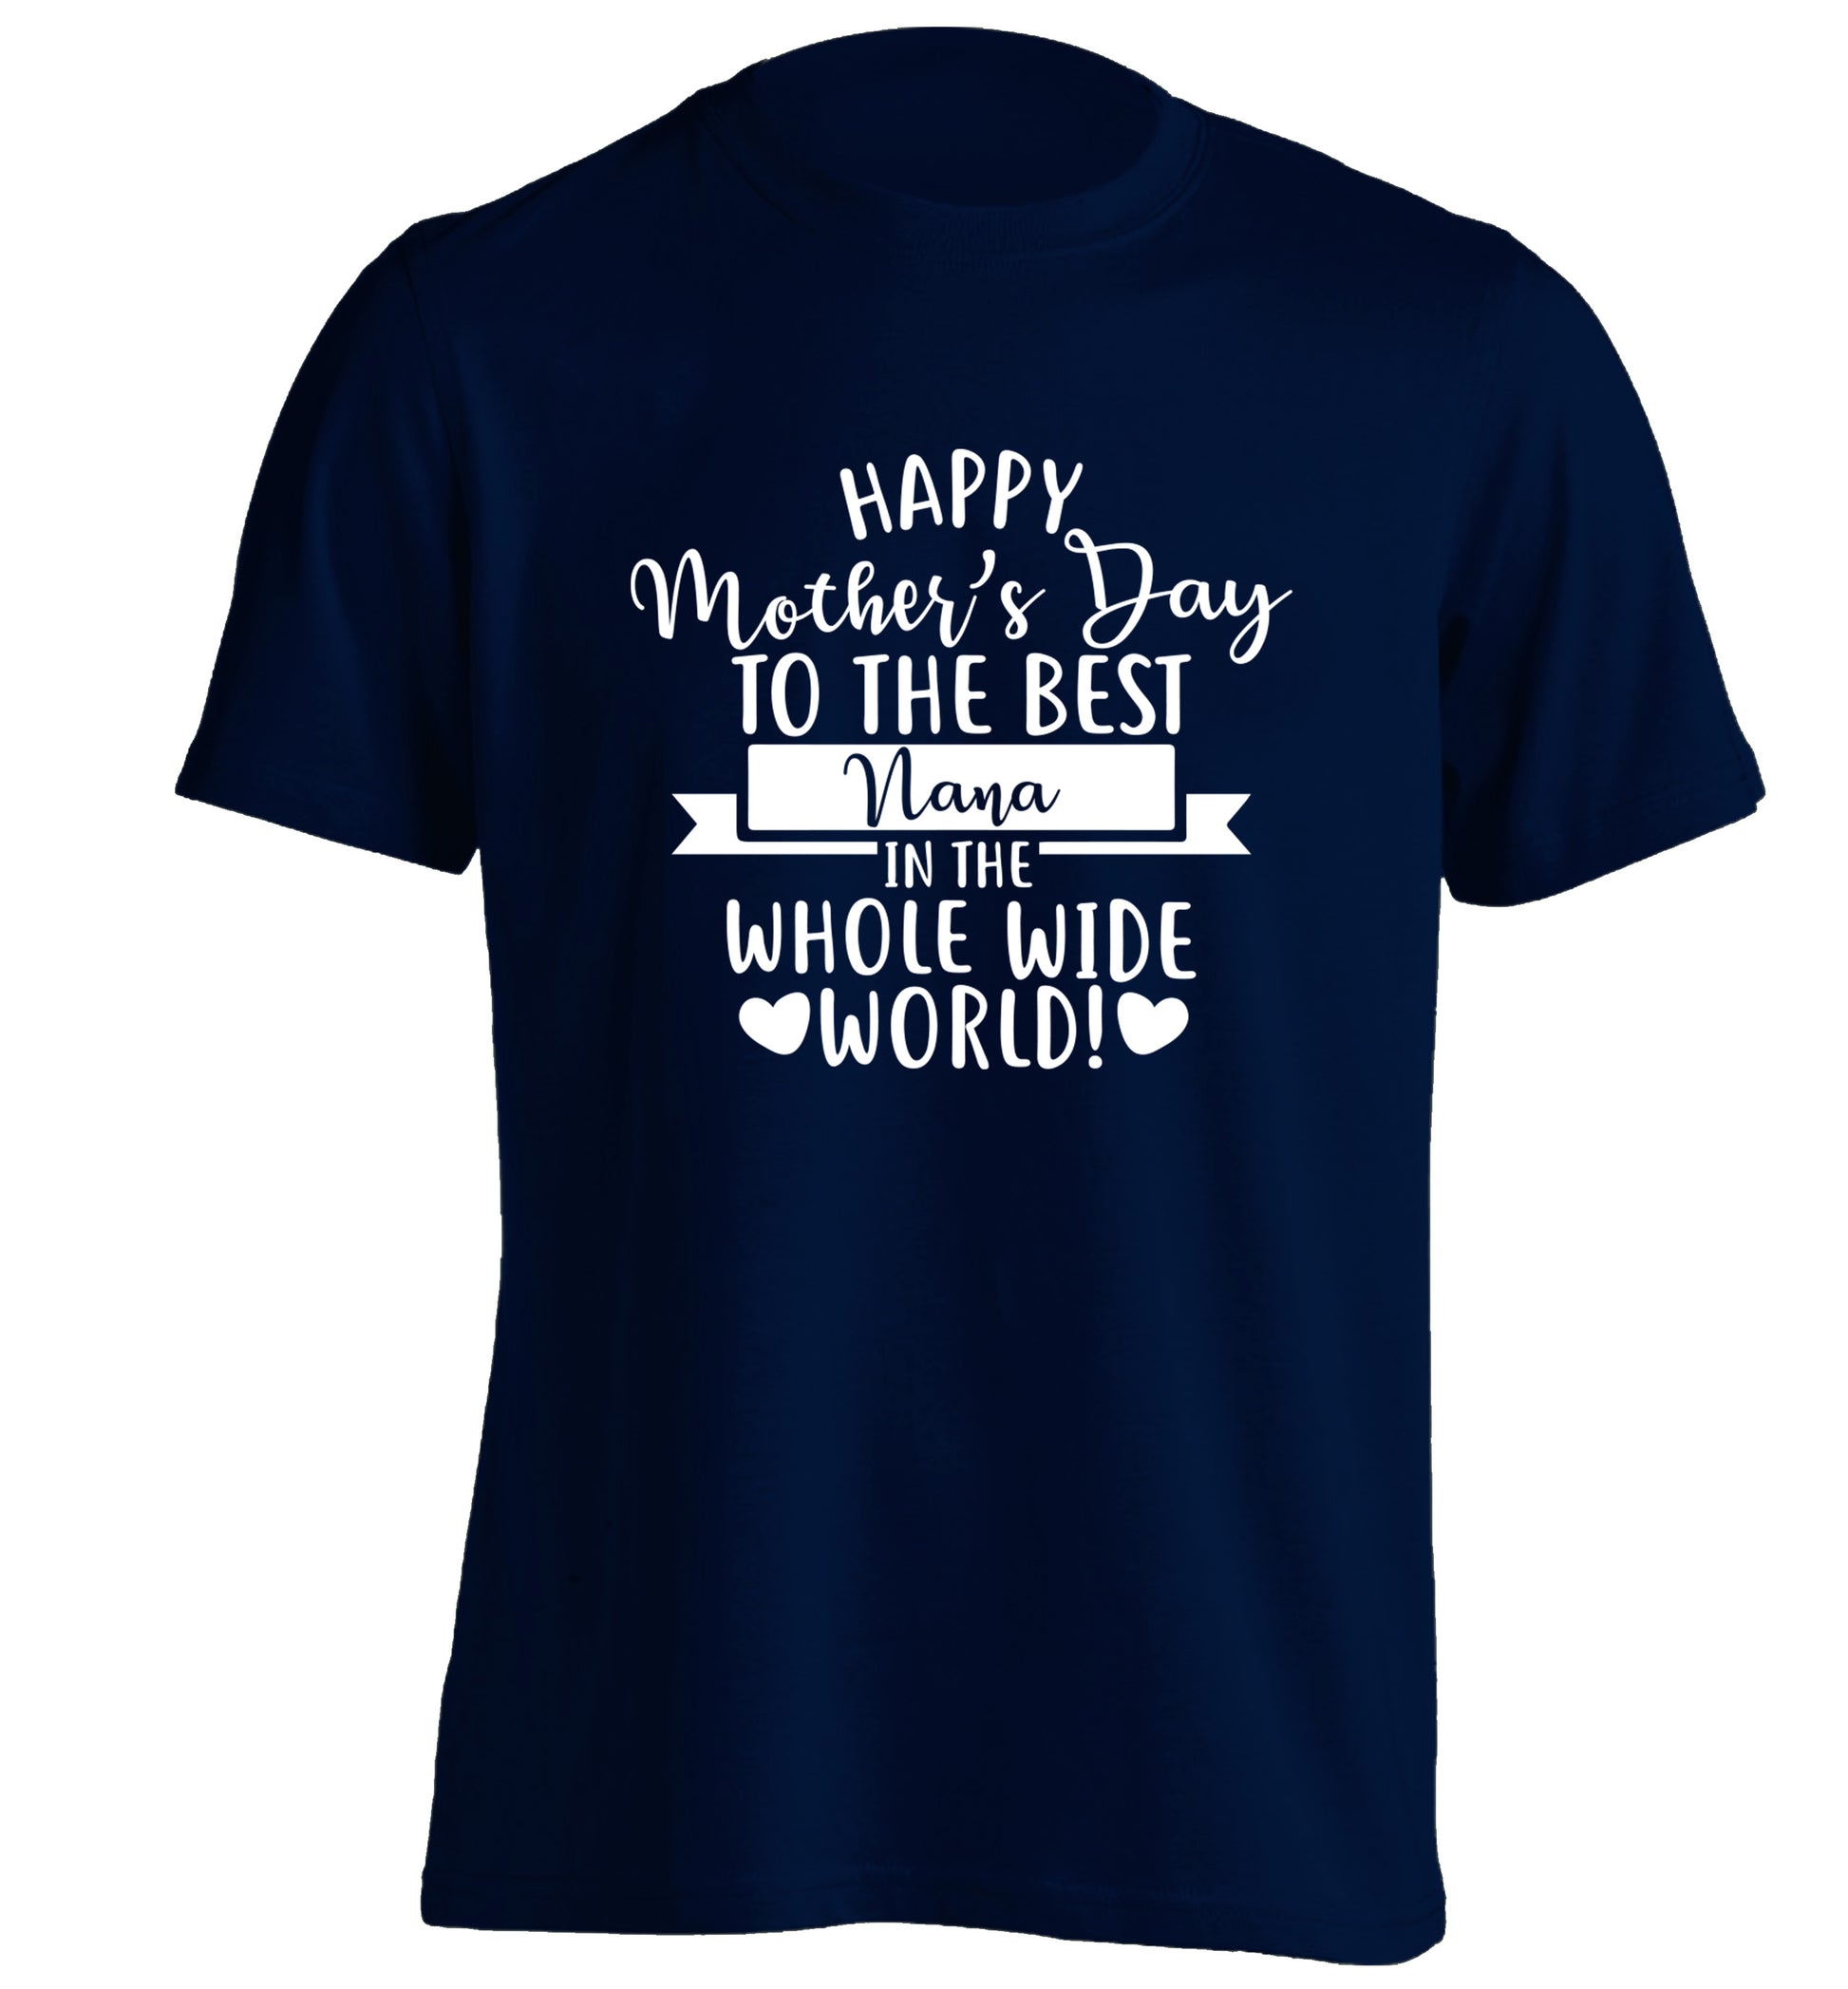 Happy mother's day to the best Nana in the world adults unisex navy Tshirt 2XL